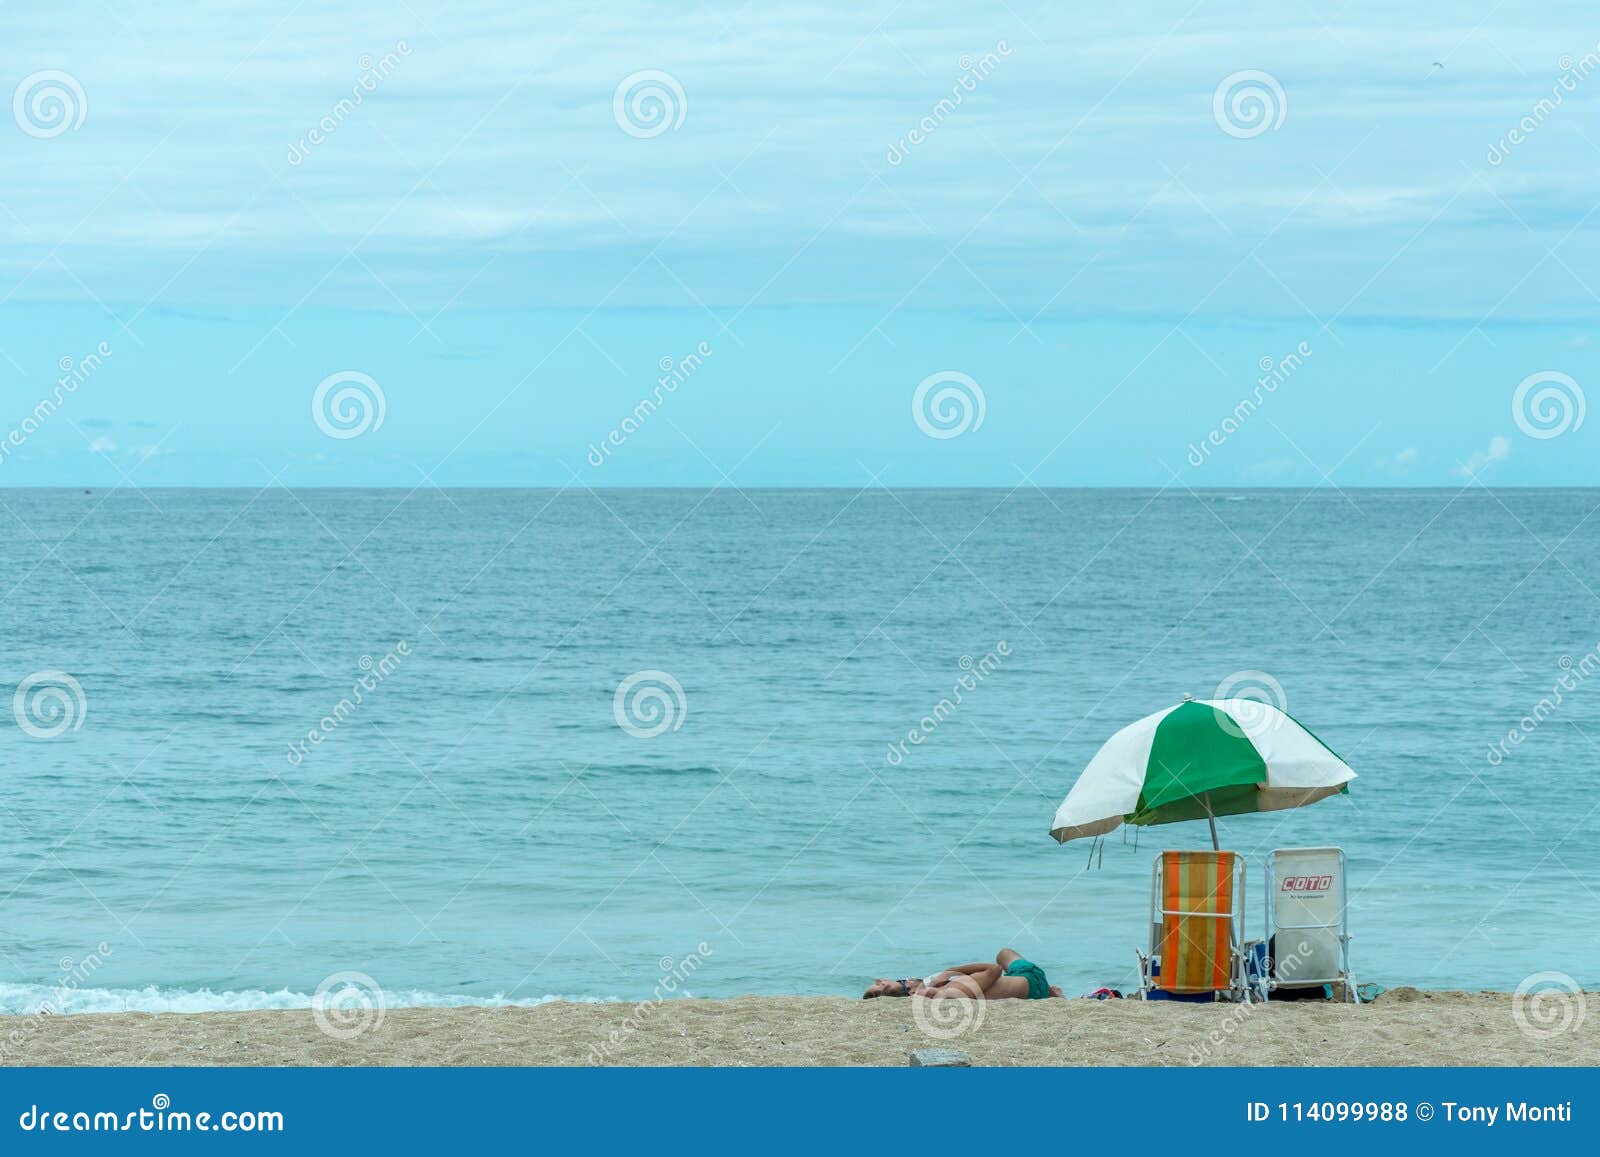 Beach Tent Umbrella A Person And Two Chairs On The